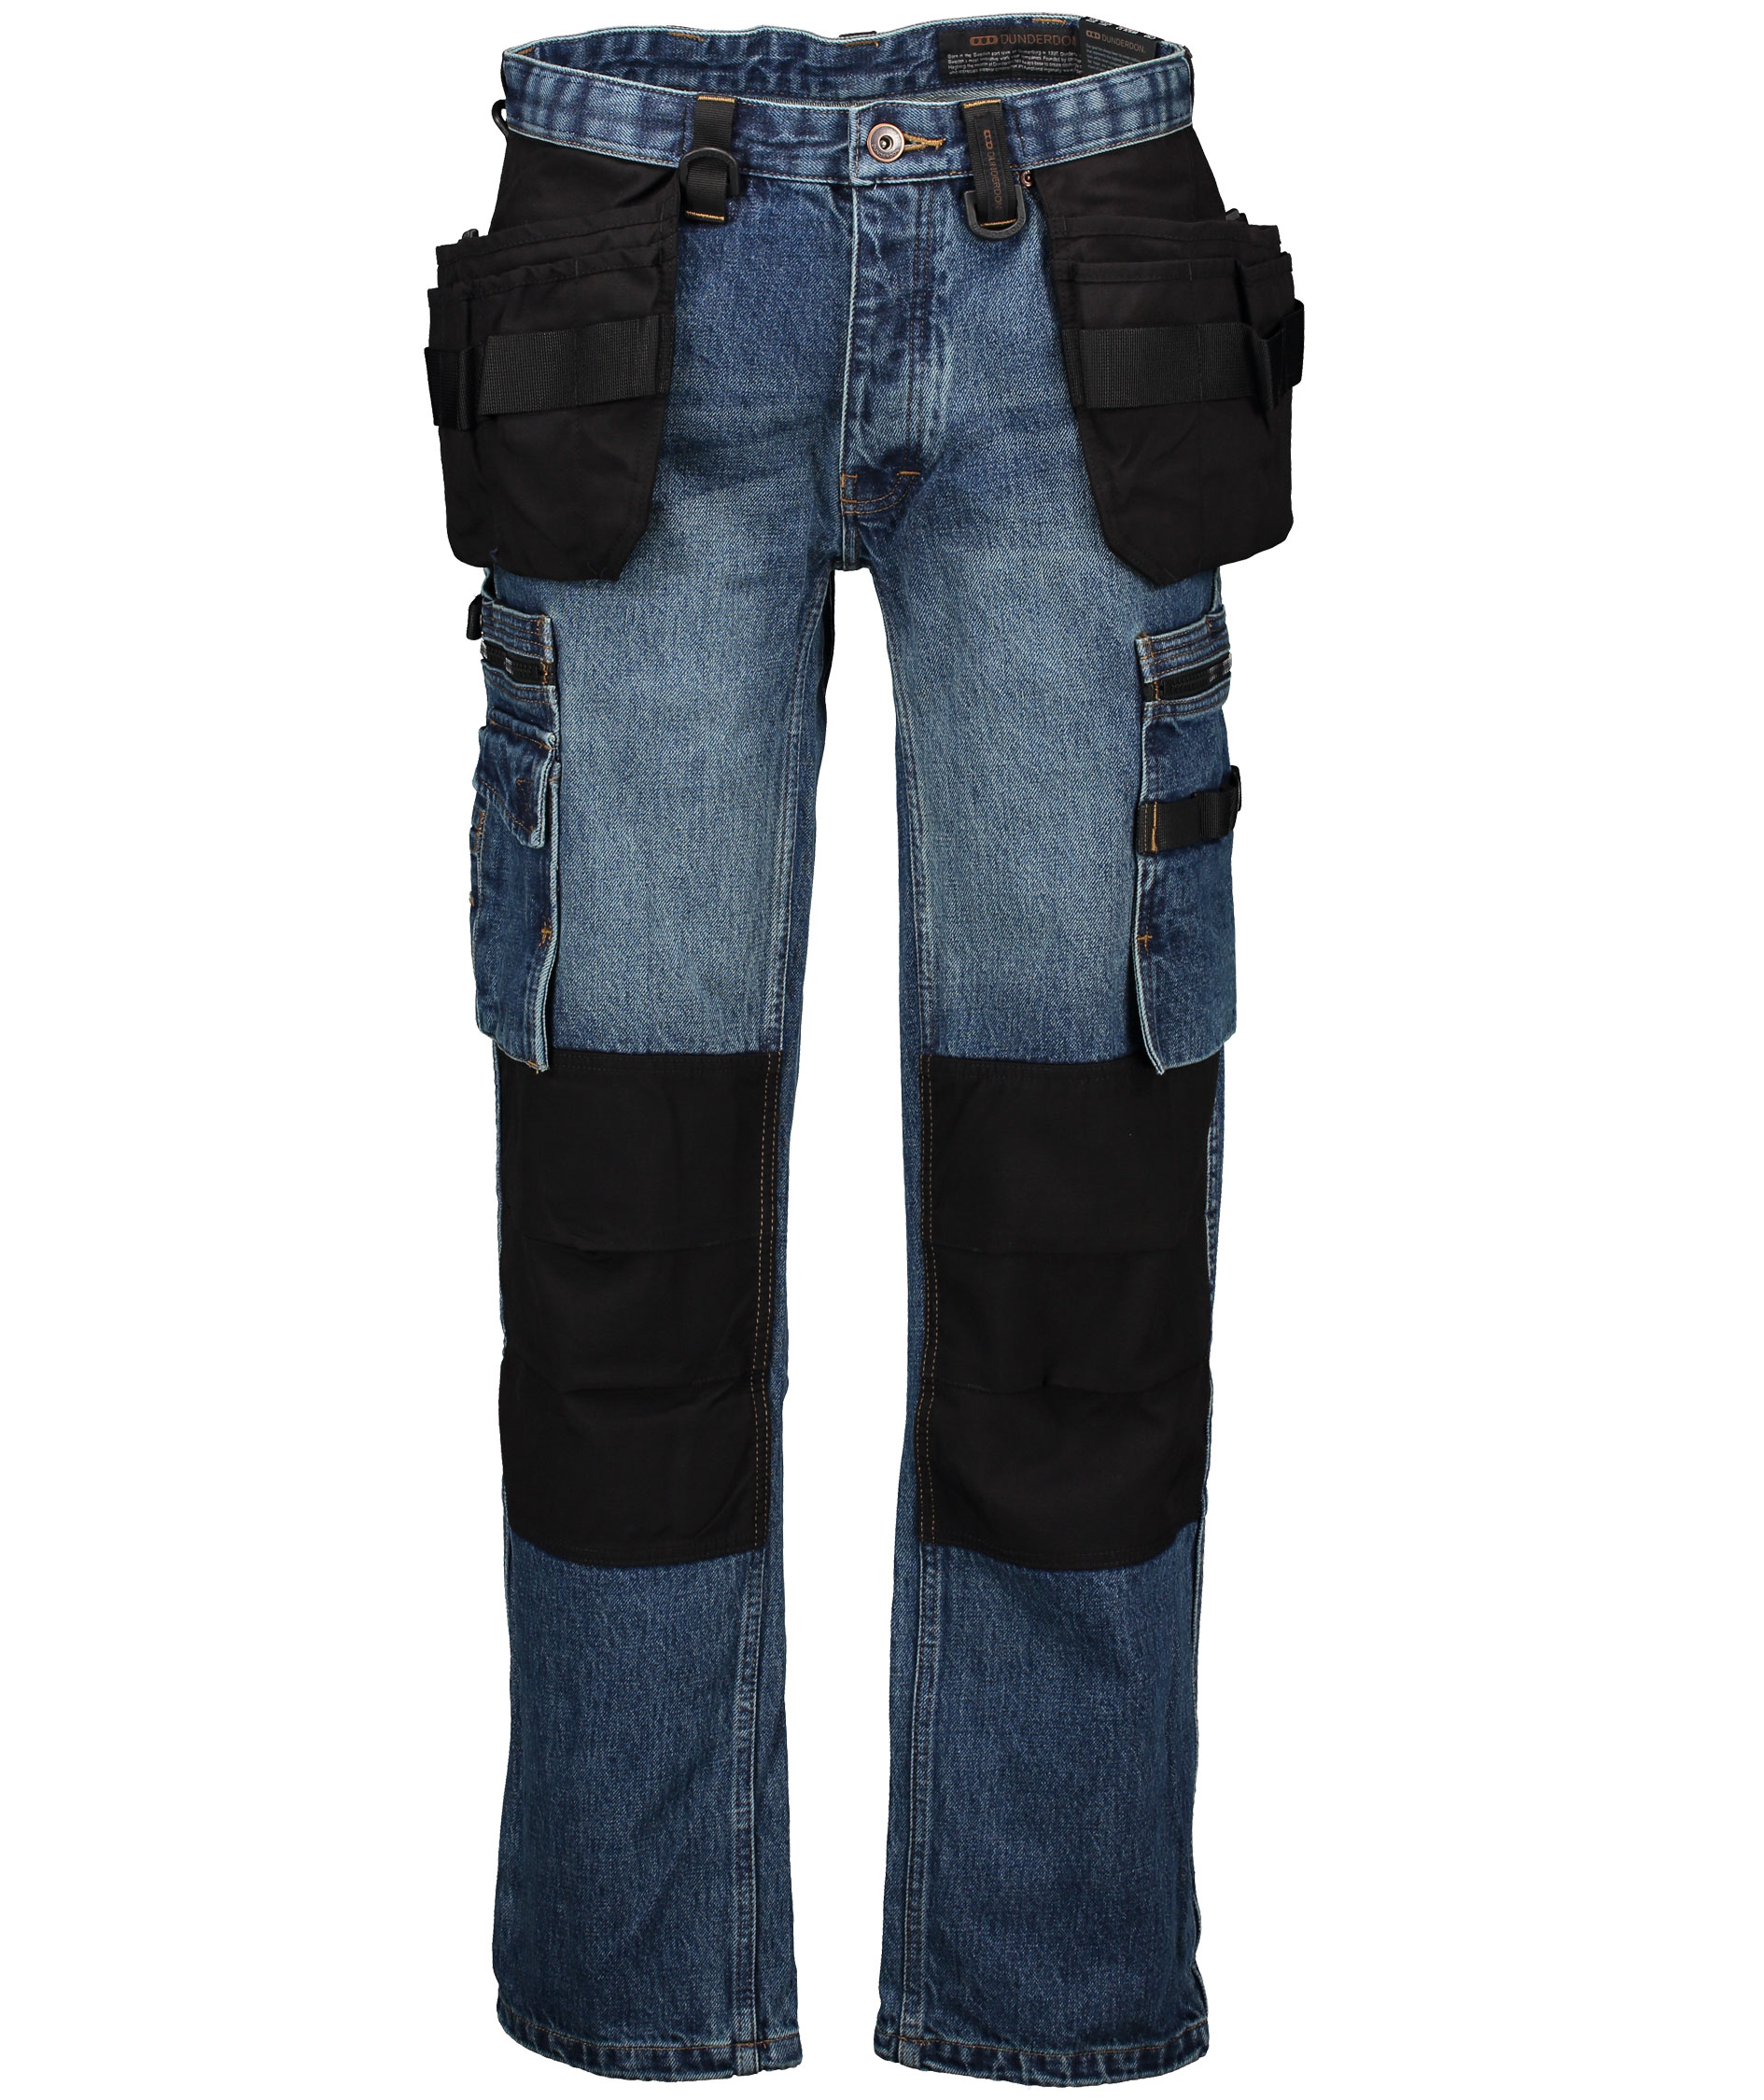 Dunderdon by Snickers P60 Cordura Denim Jean Trousers